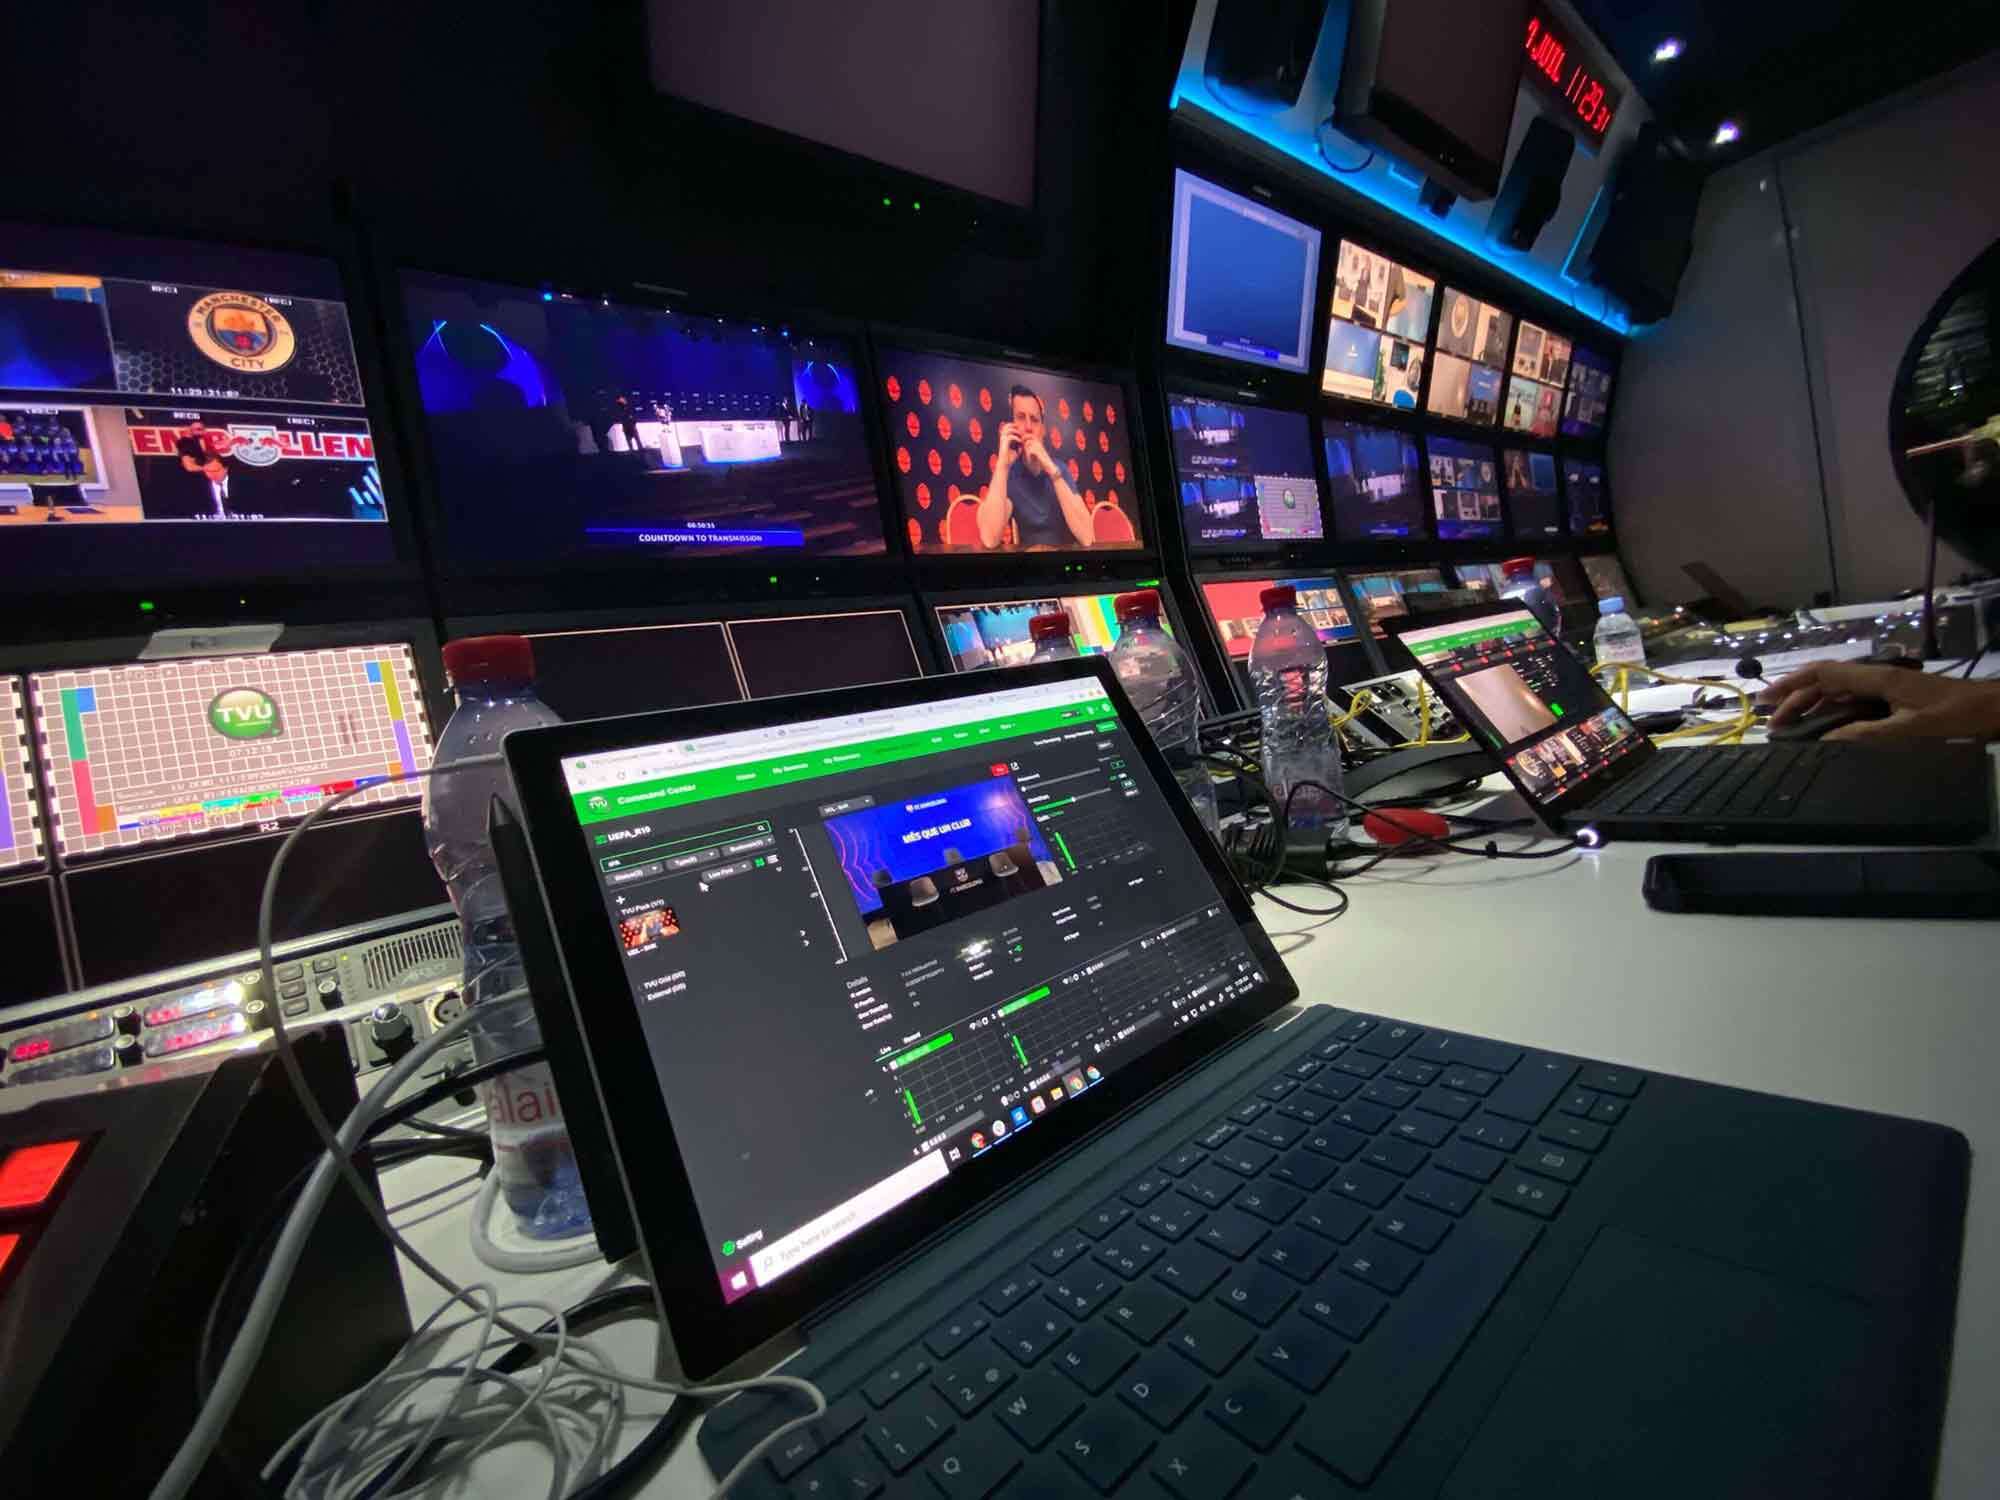 UEFA uses TVU Live broadcast and remote production solutions